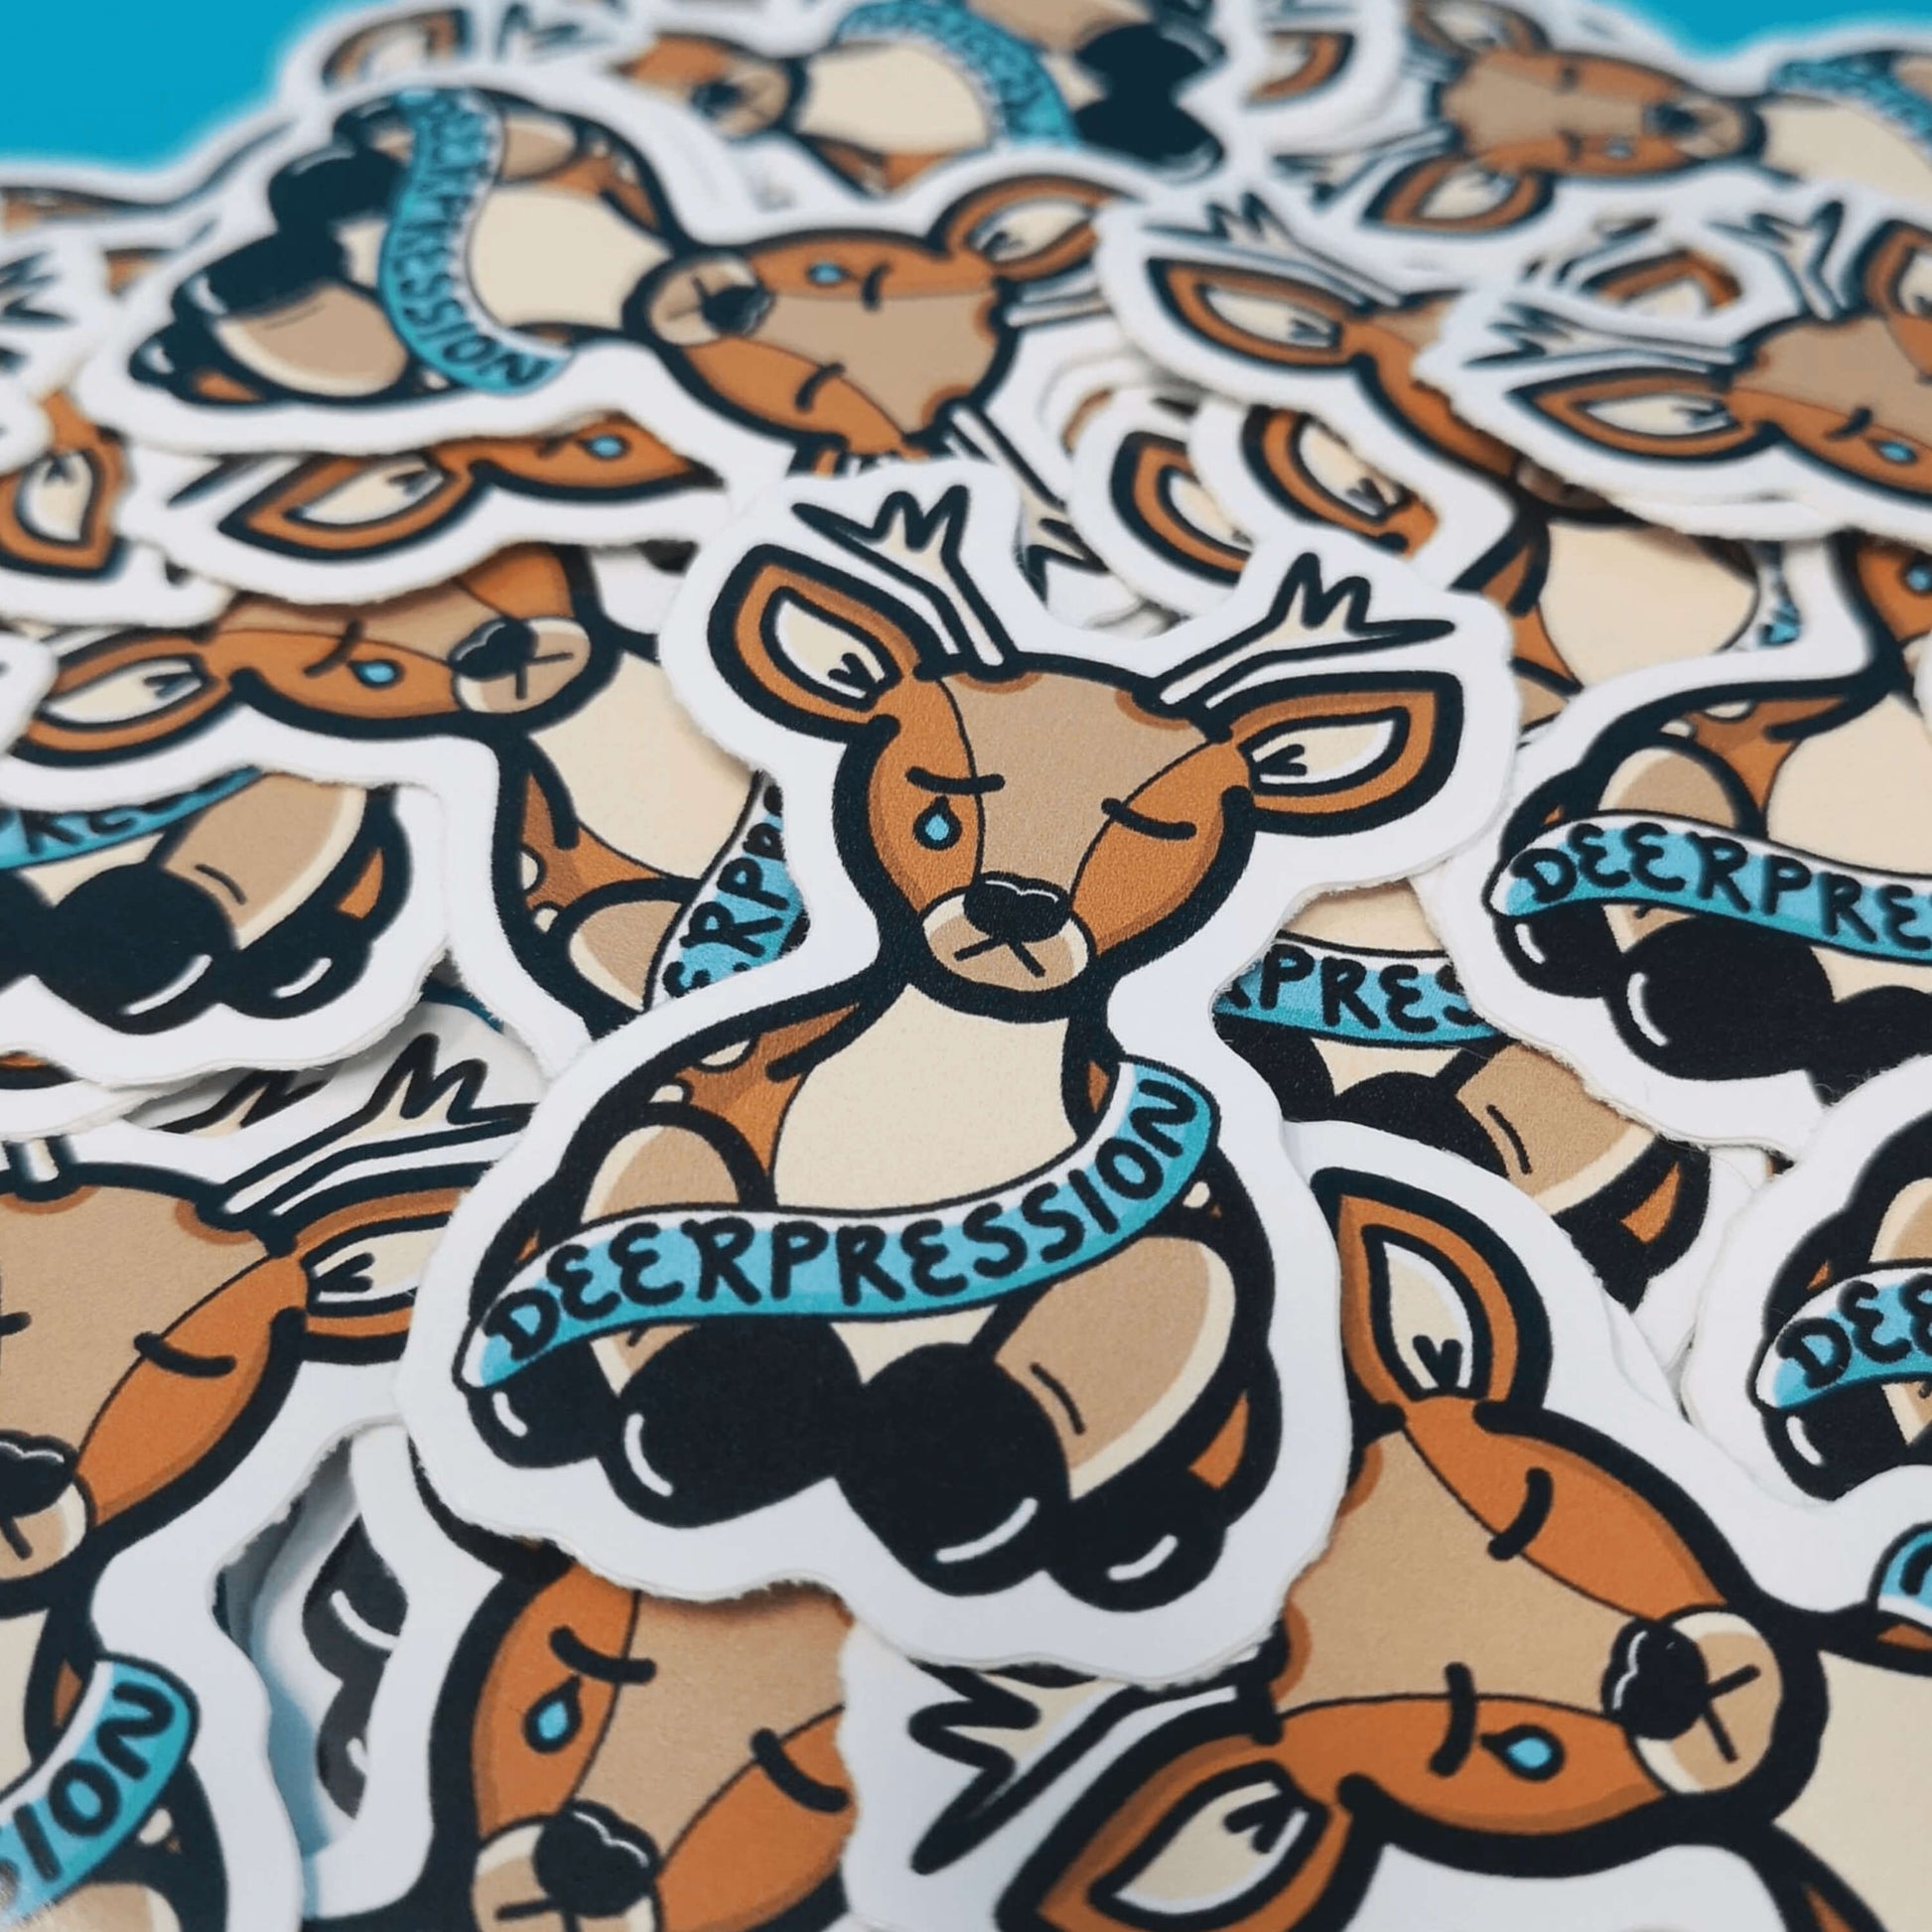 The Deerpression Sticker - Depression laying on a pile of multiple stickers on a blue background. The deer shaped sticker has its eyes closed with a tear falling down one cheek, across its middle is a blue banner with black text reading 'deerpression'. The design was created to raise awareness for depression.